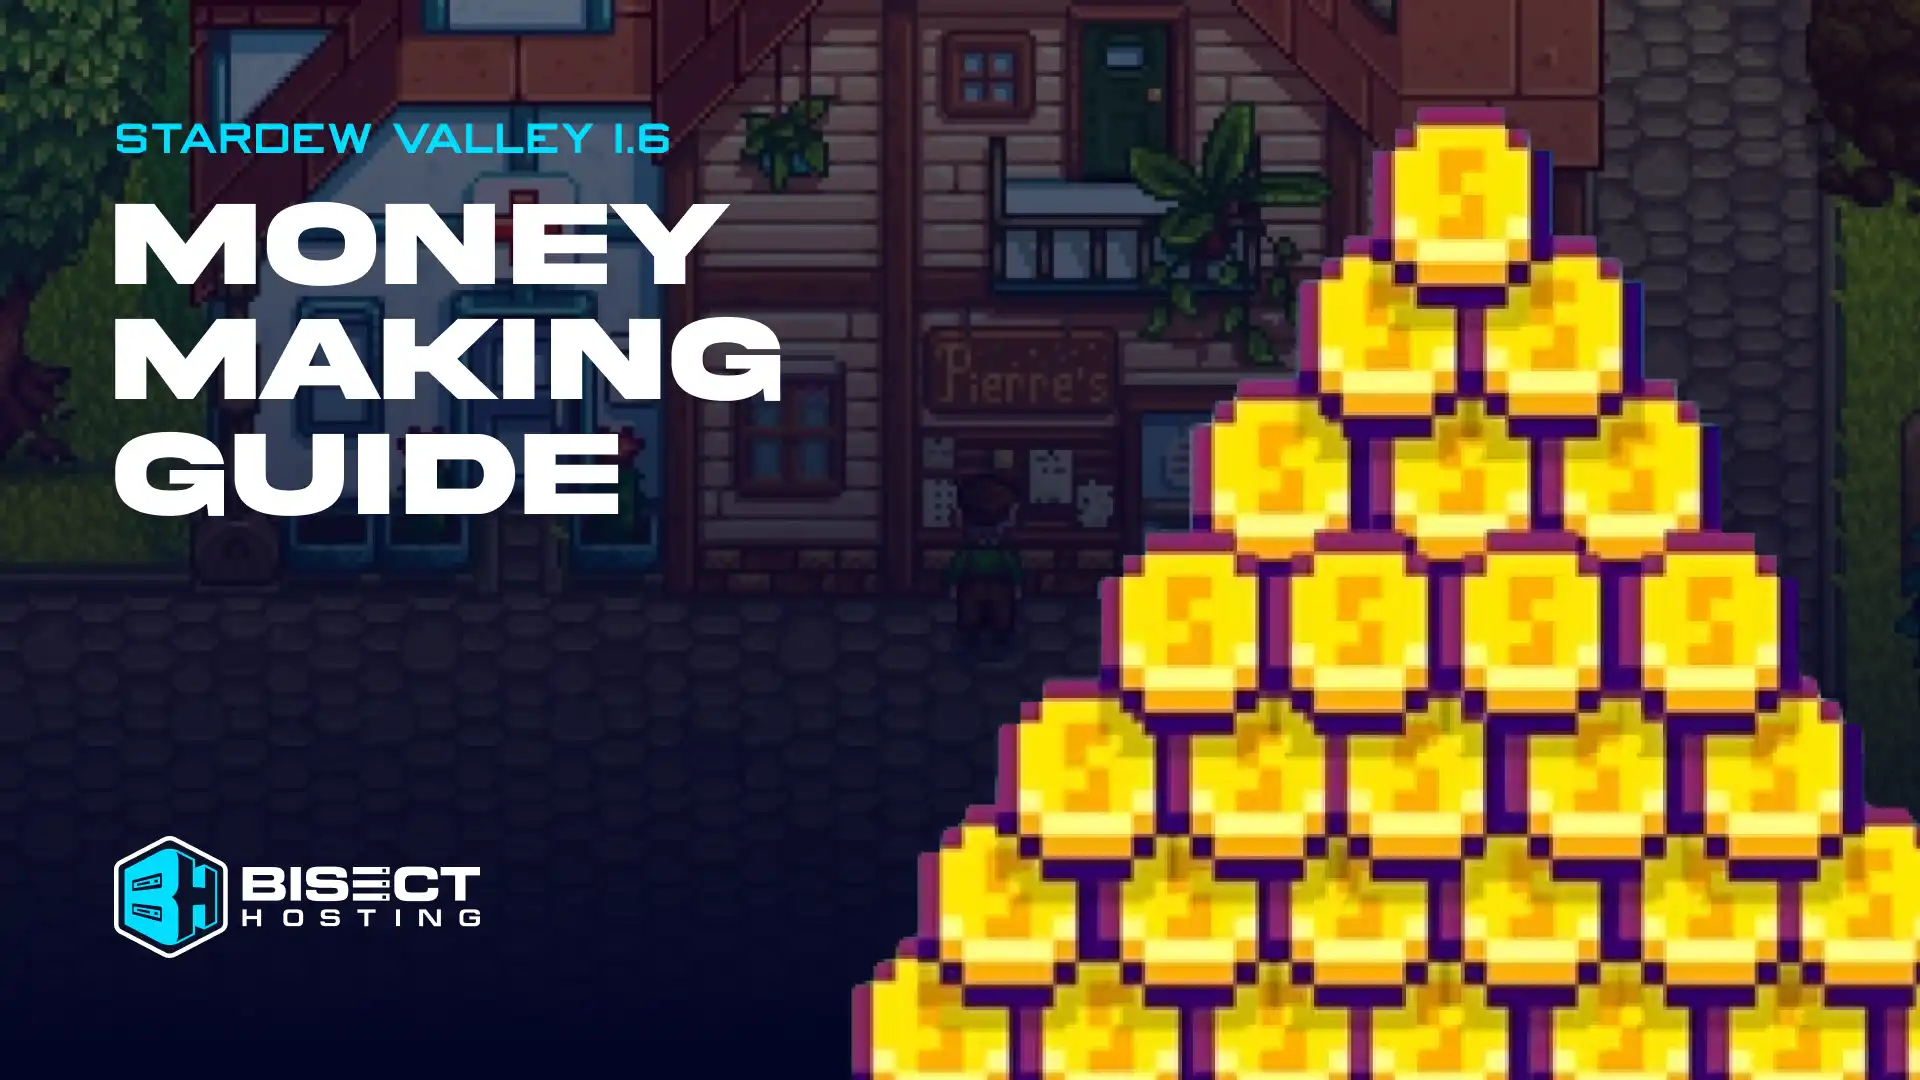 Stardew Valley 1.6 Money Making Guide: High Profit Farms, Best Crops, Professions, & More